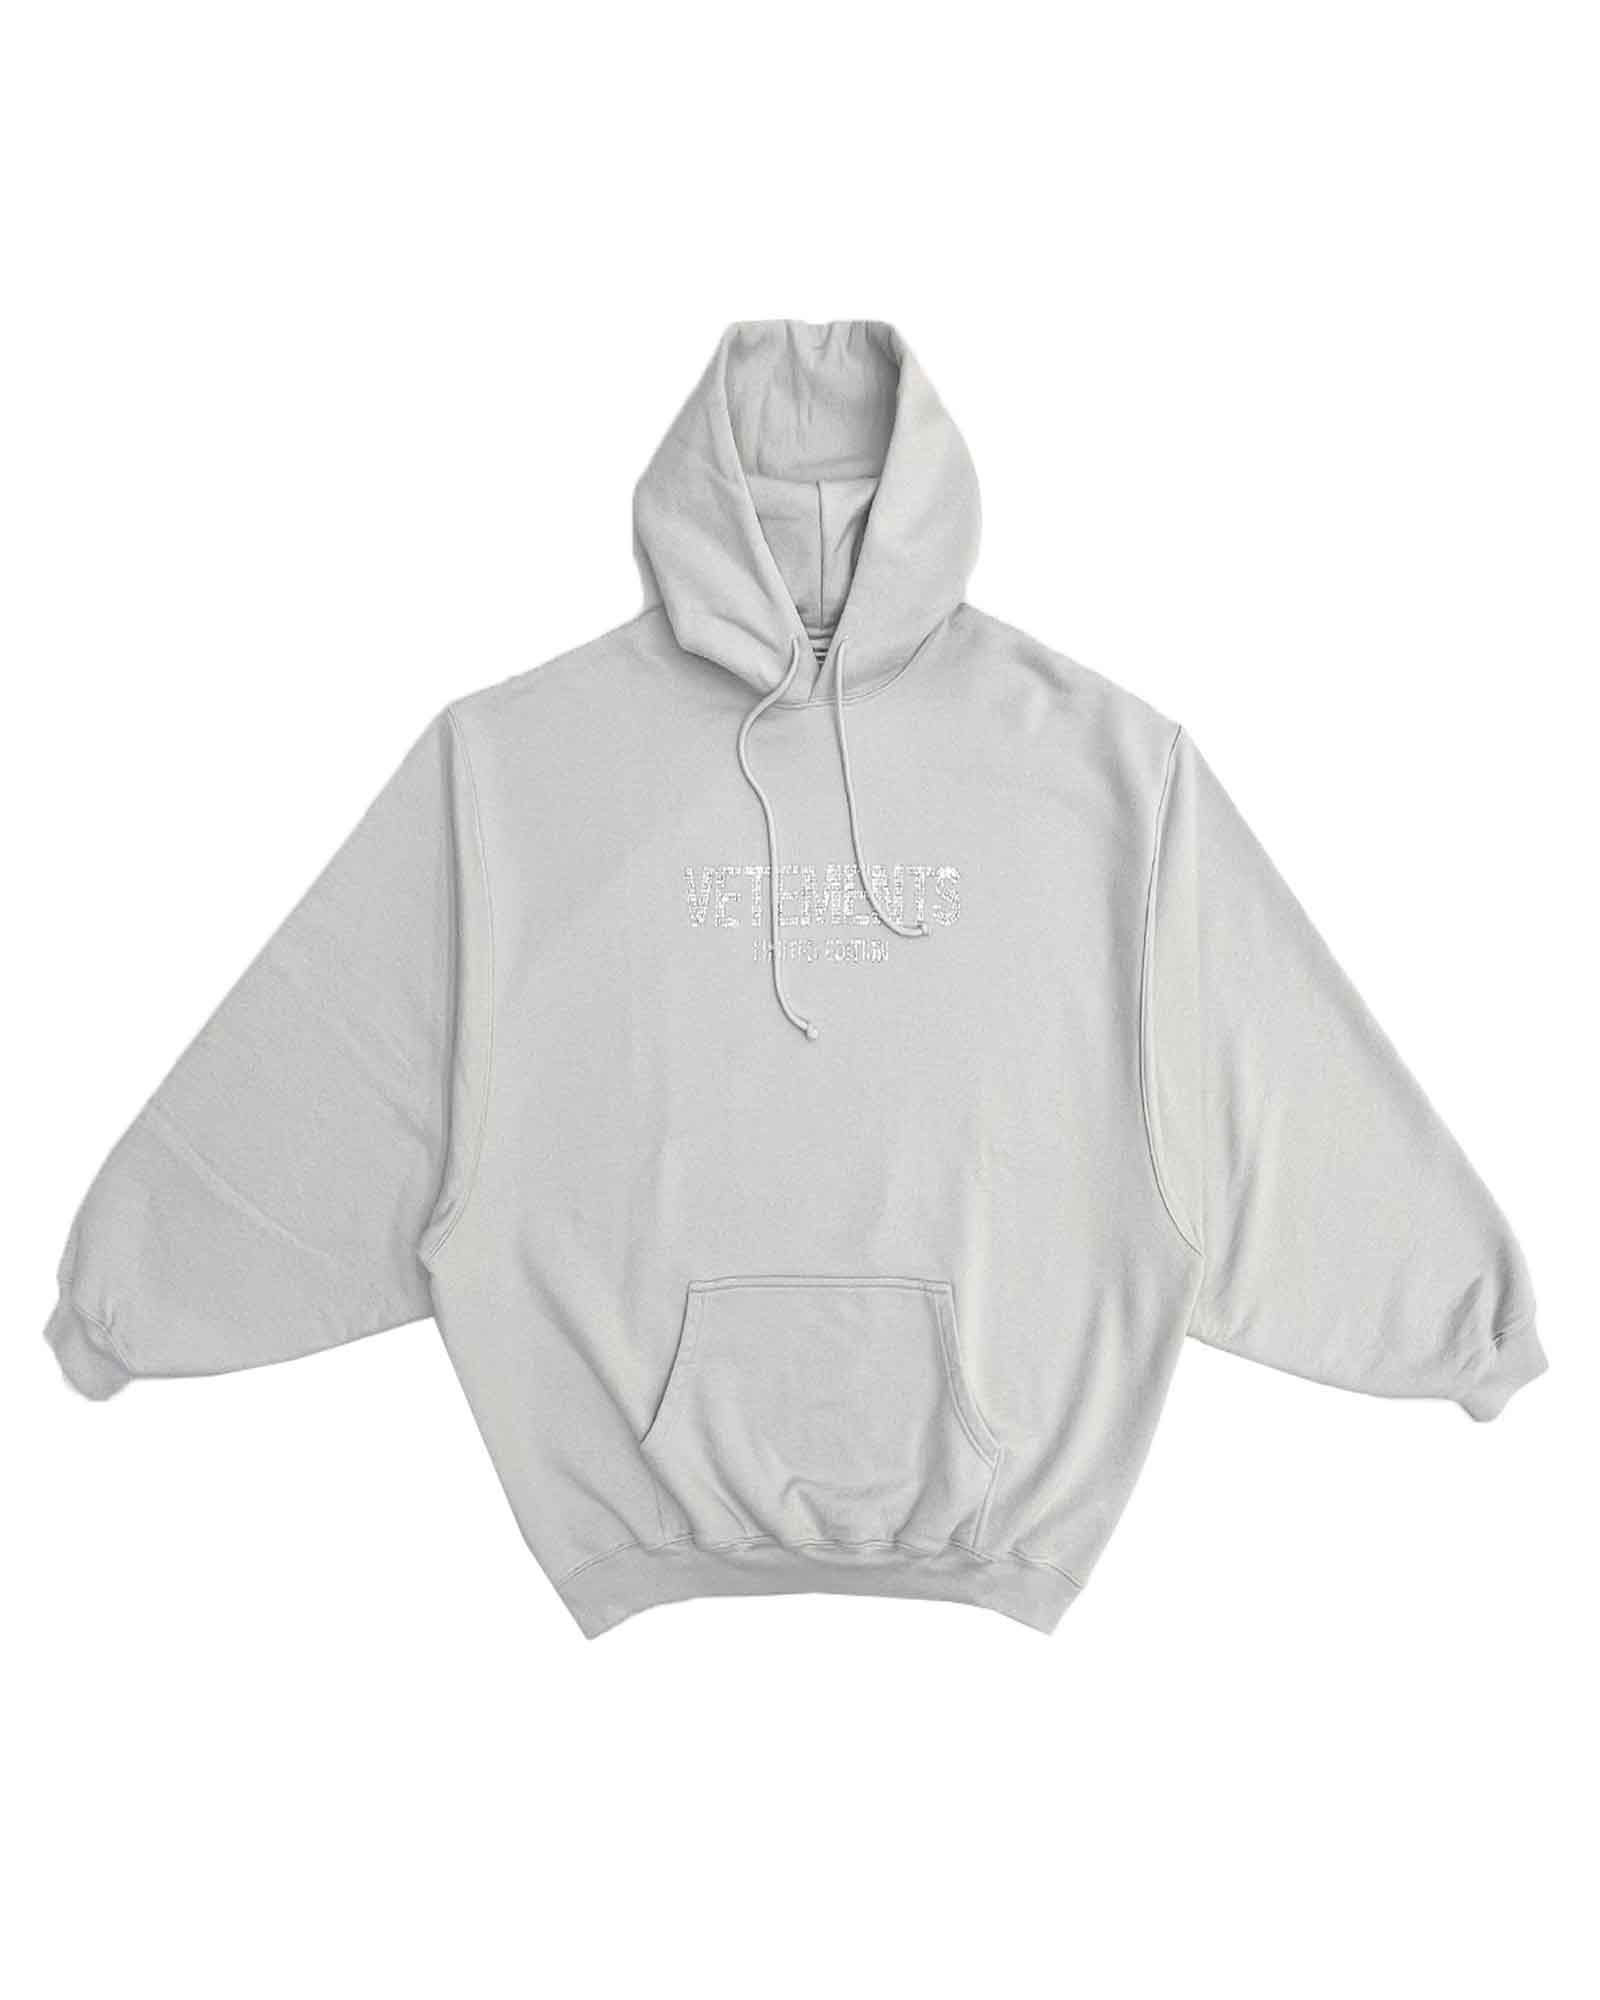 VETEMENTS - Gradient logo limited edition hoodie ( グラデーション